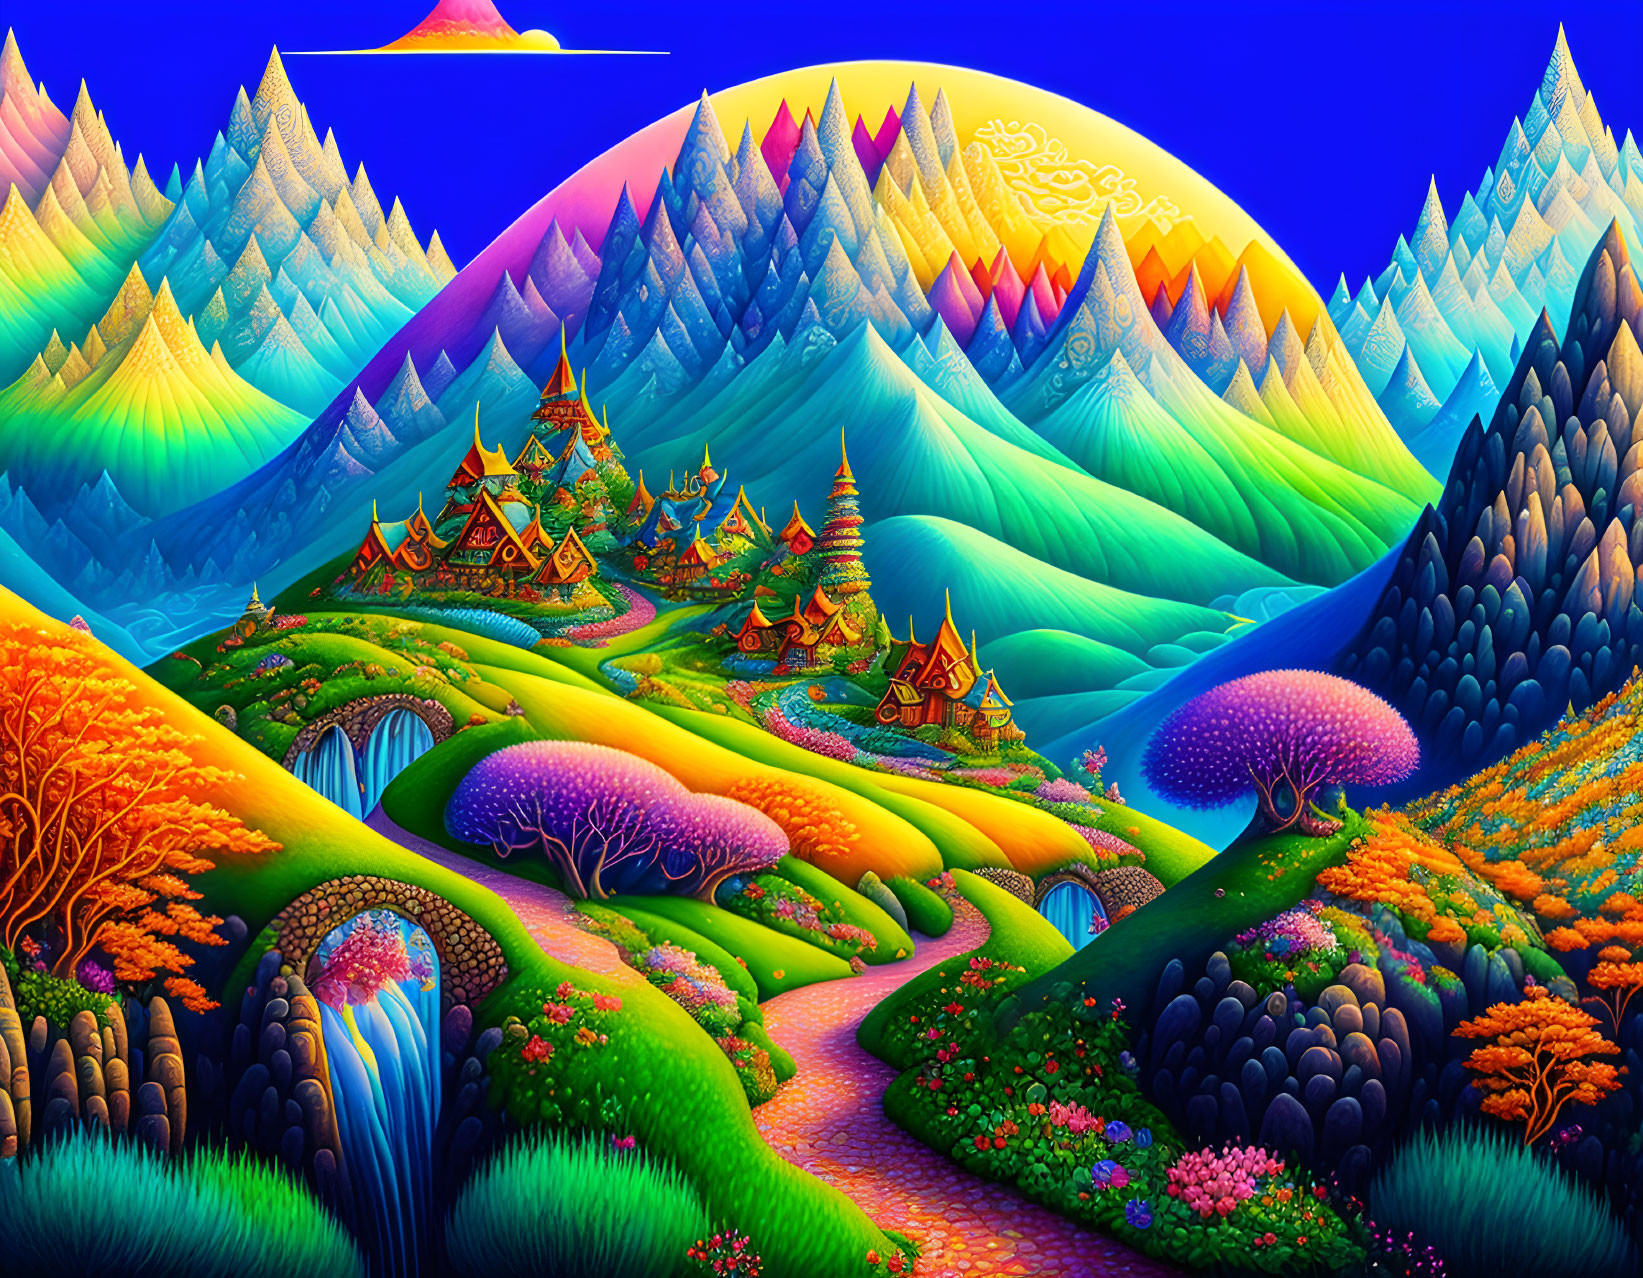 Colorful Stylized Landscape with Whimsical Elements